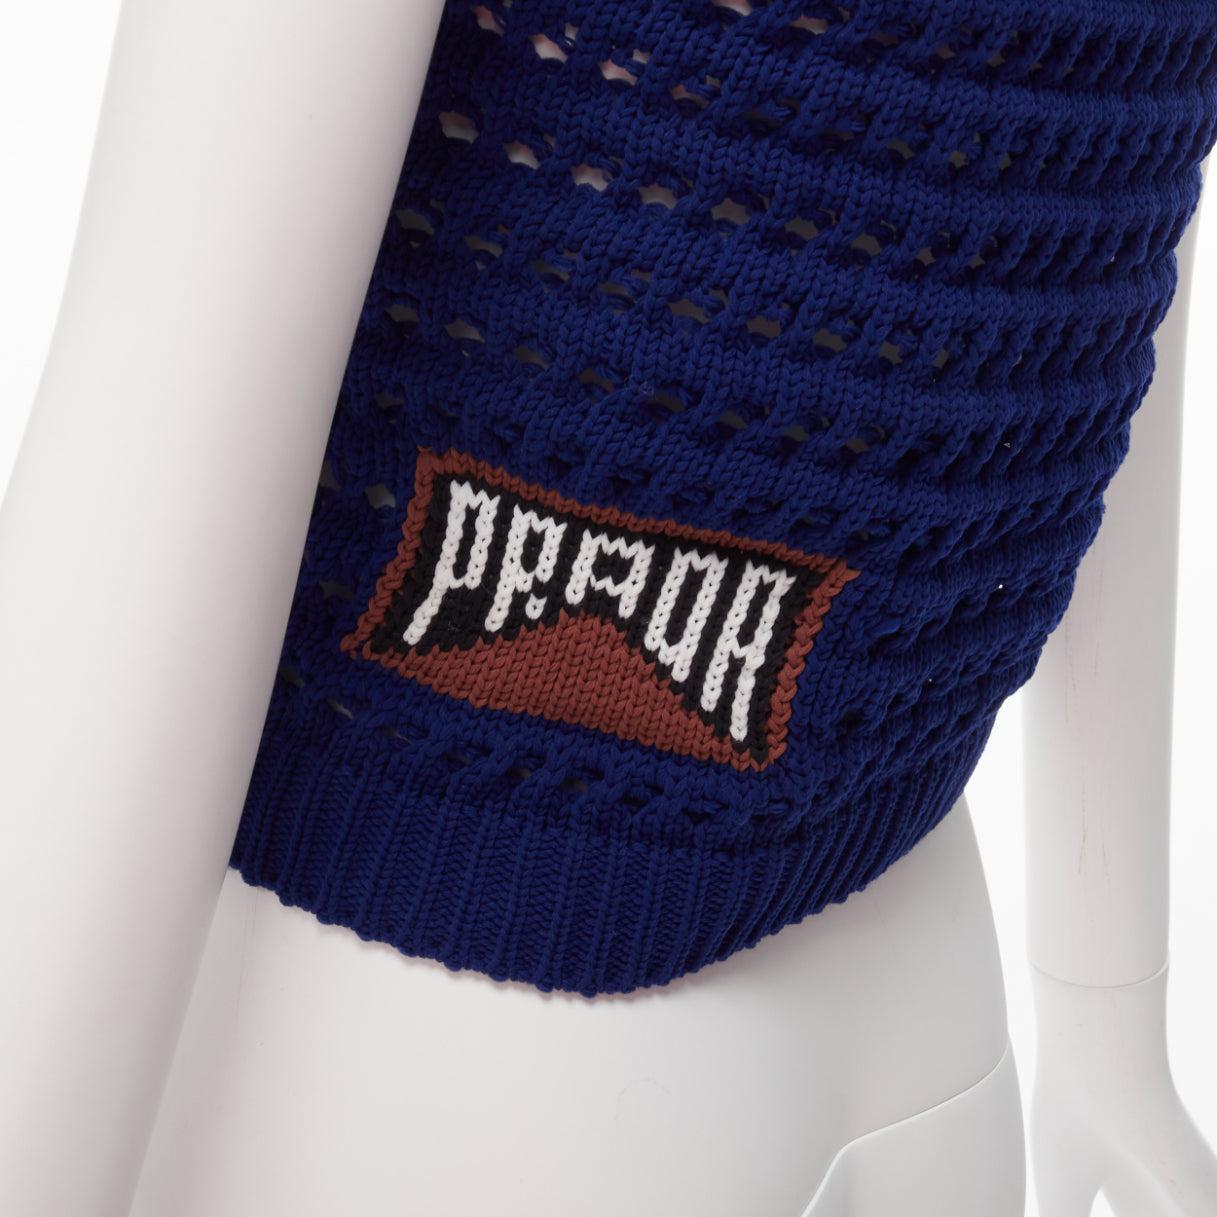 PRADA 2018 blue brown black logo crochet knit cropped tank top IT36 XXS
Reference: TGAS/D00565
Brand: Prada
Designer: Miuccia Prada
Collection: 2018
Material: Polyester
Color: Blue, Multicolour
Pattern: Solid
Closure: Pullover
Extra Details: PRADA